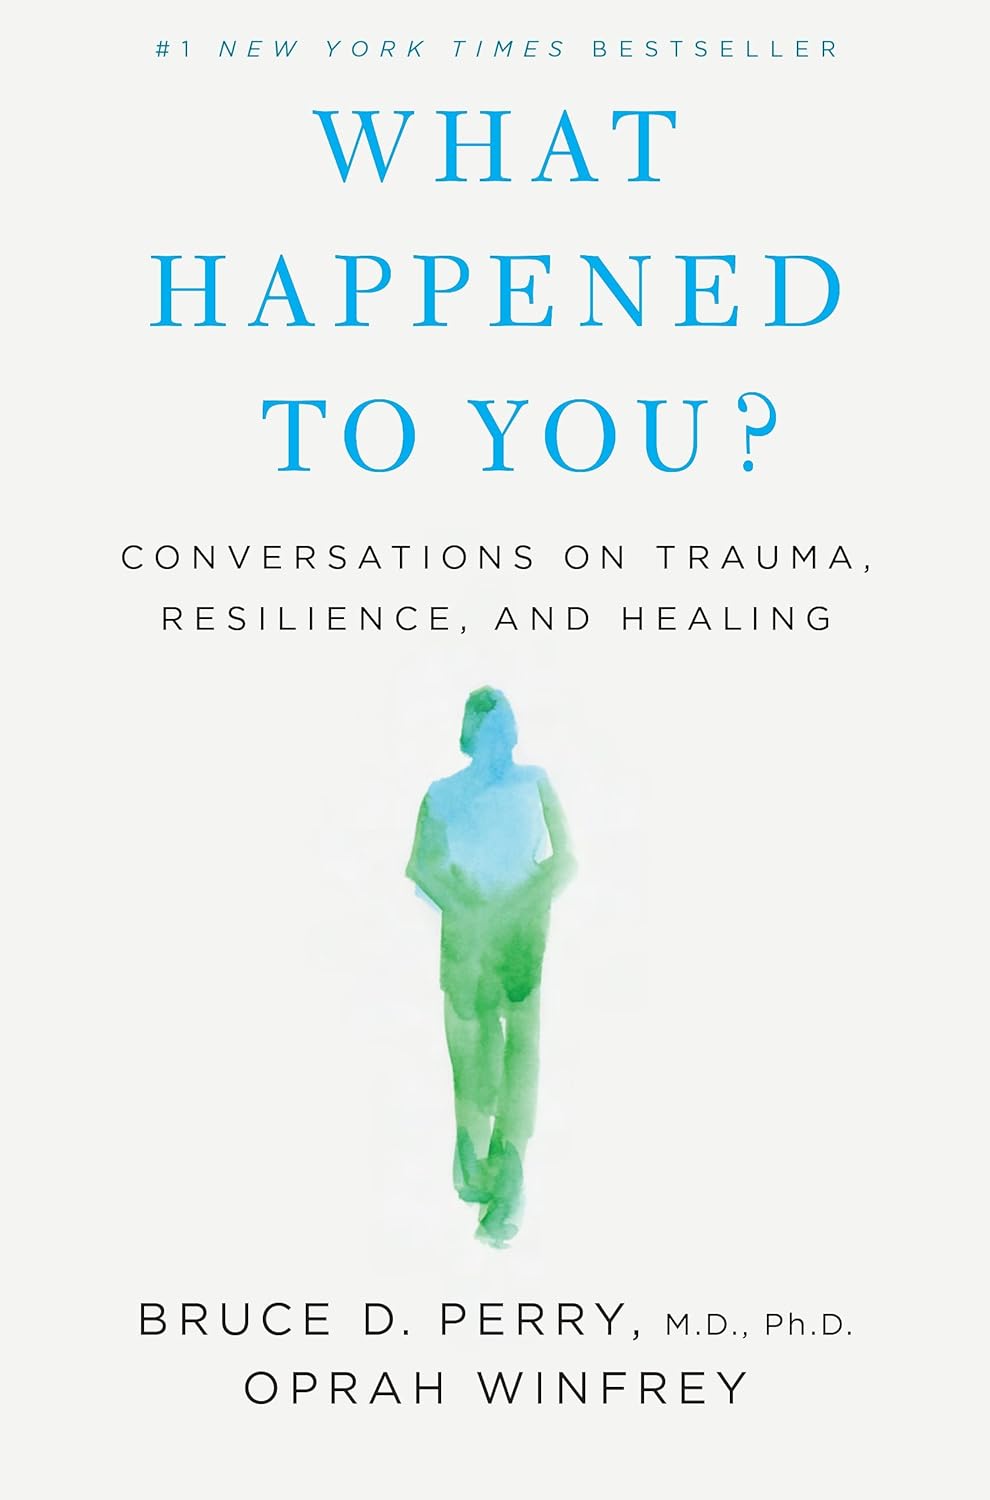 What Happened to You? by Oprah Winfrey & Bruce D. Perry